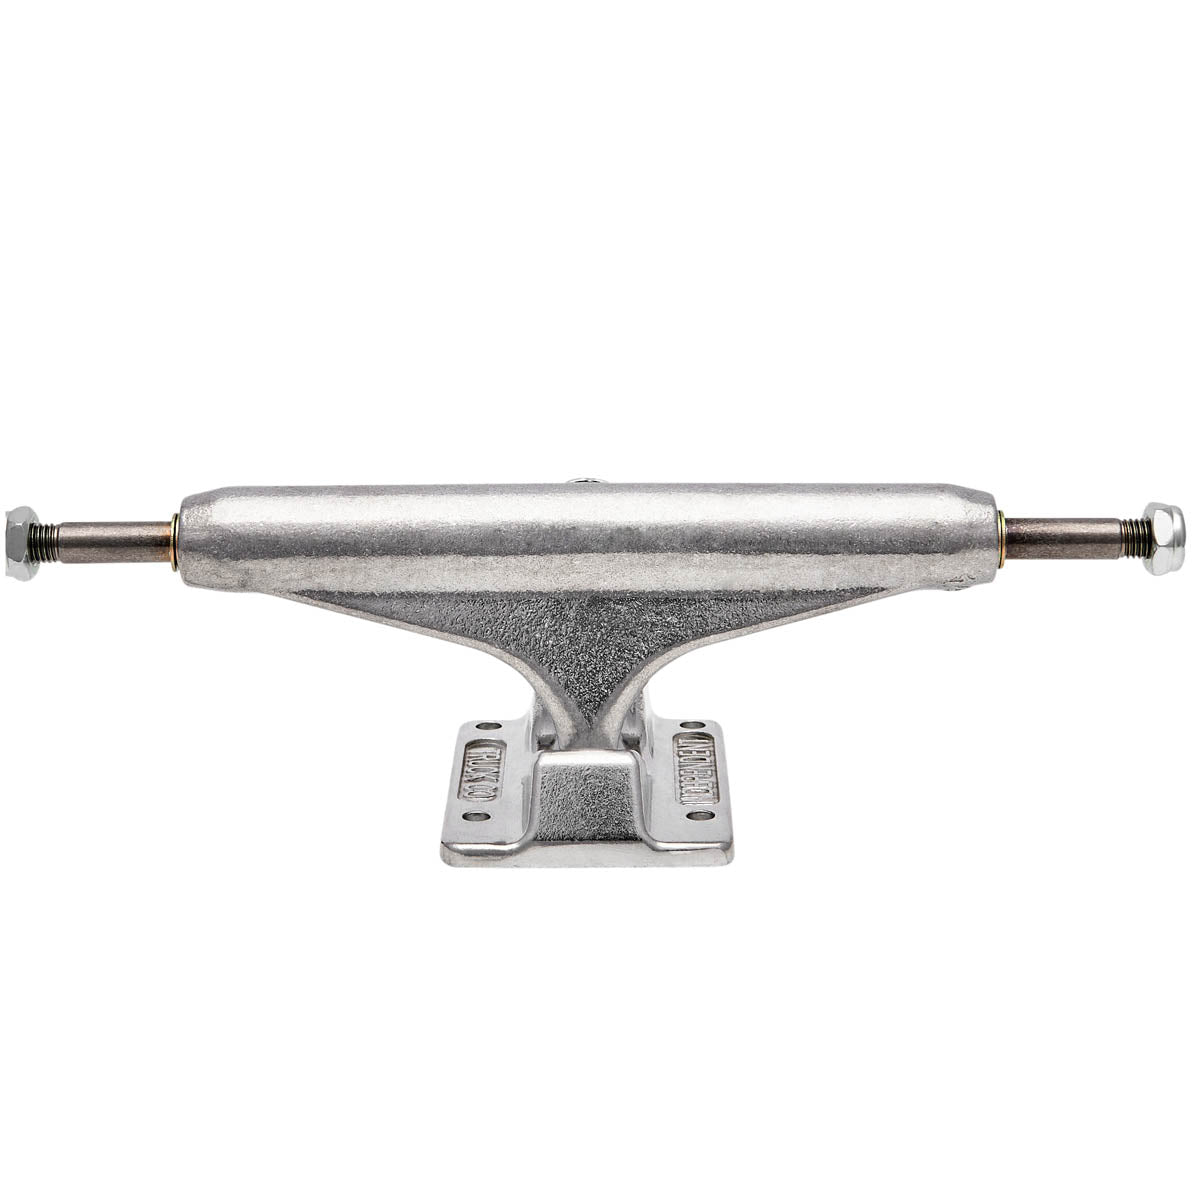 Independent Stage 11 Forged Titanium Skateboard Trucks - Silver image 3